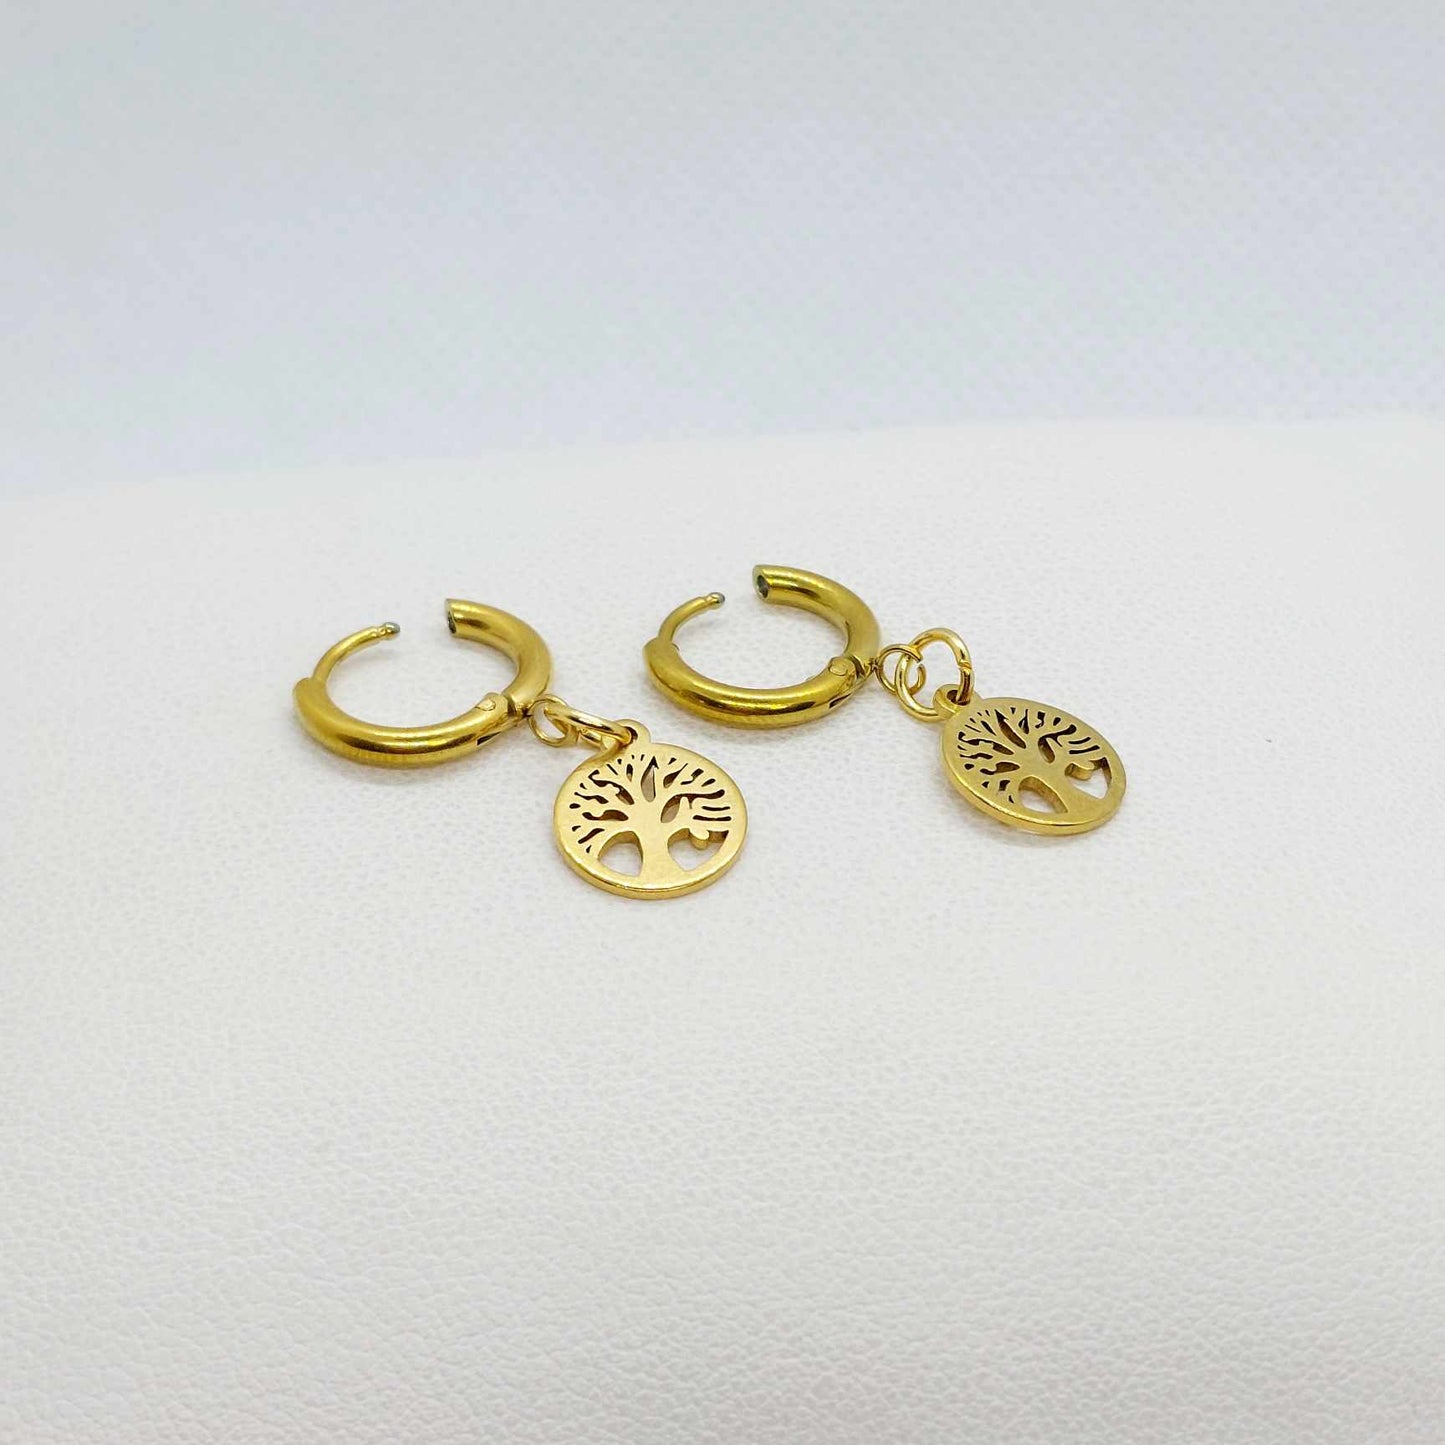 Tree of Life on a Hoop Earrings in Gold Plated Stainless Steel